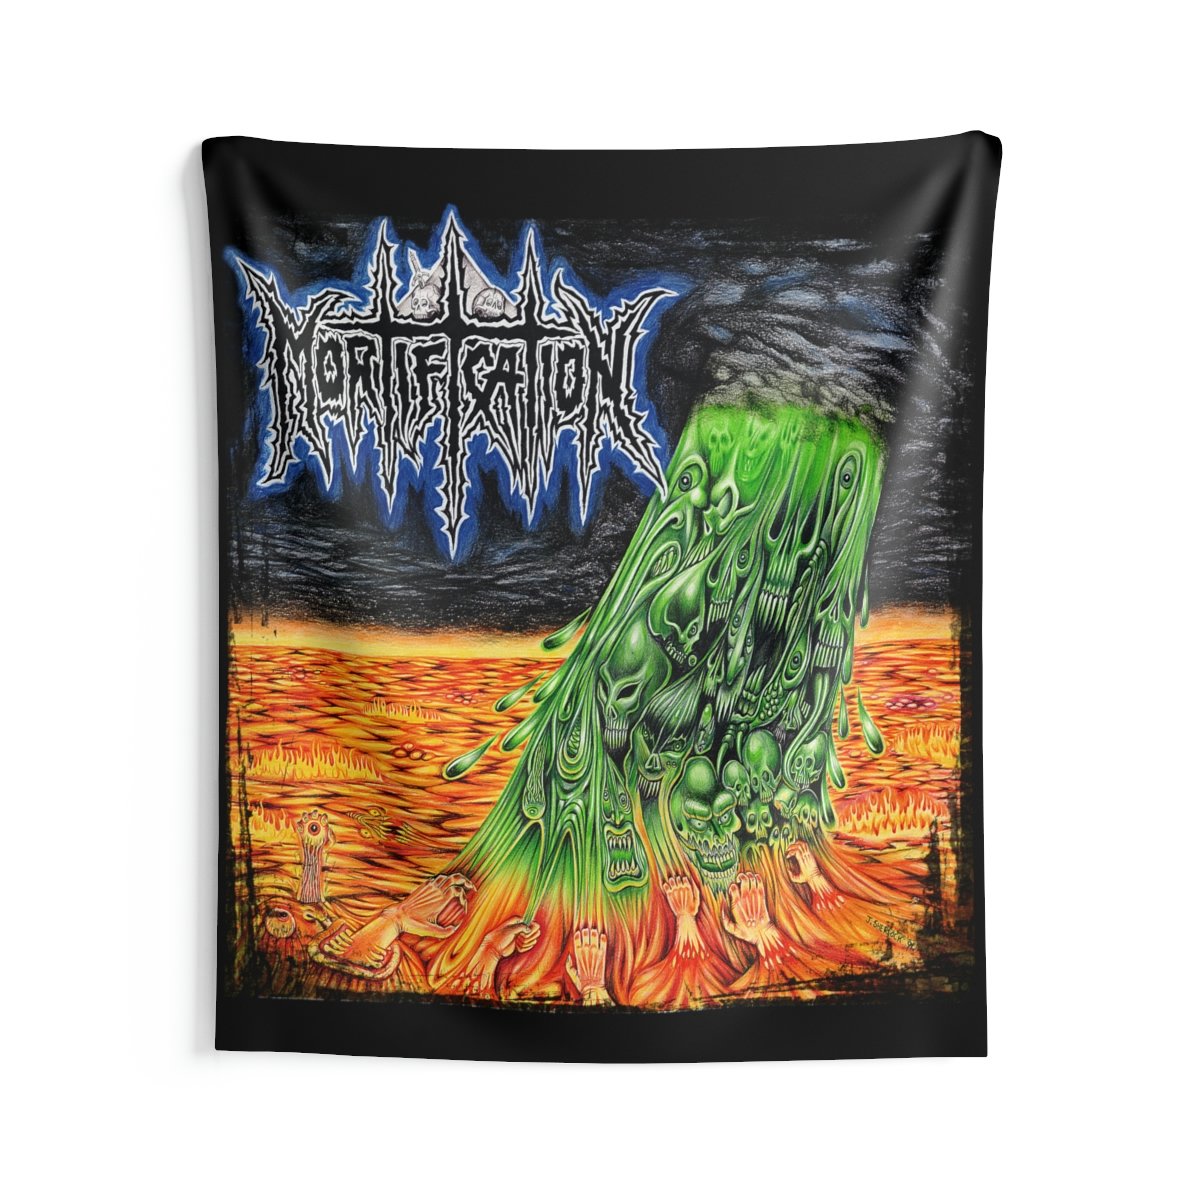 Mortification Indoor Wall Tapestries